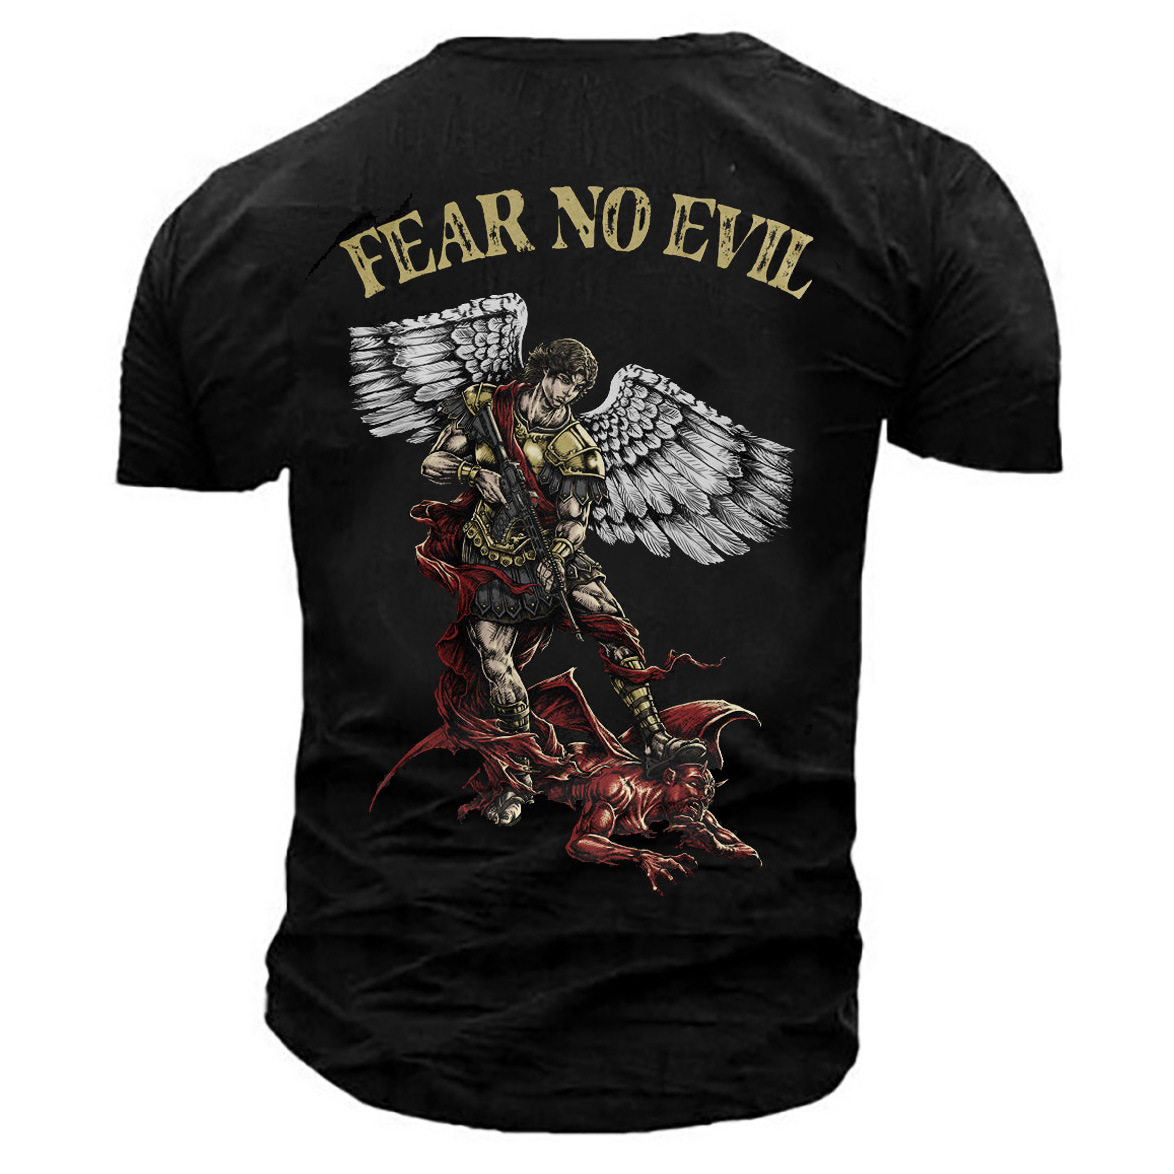 Men's Outdoor Fear No Chic Evil Printed Cotton T-shirt